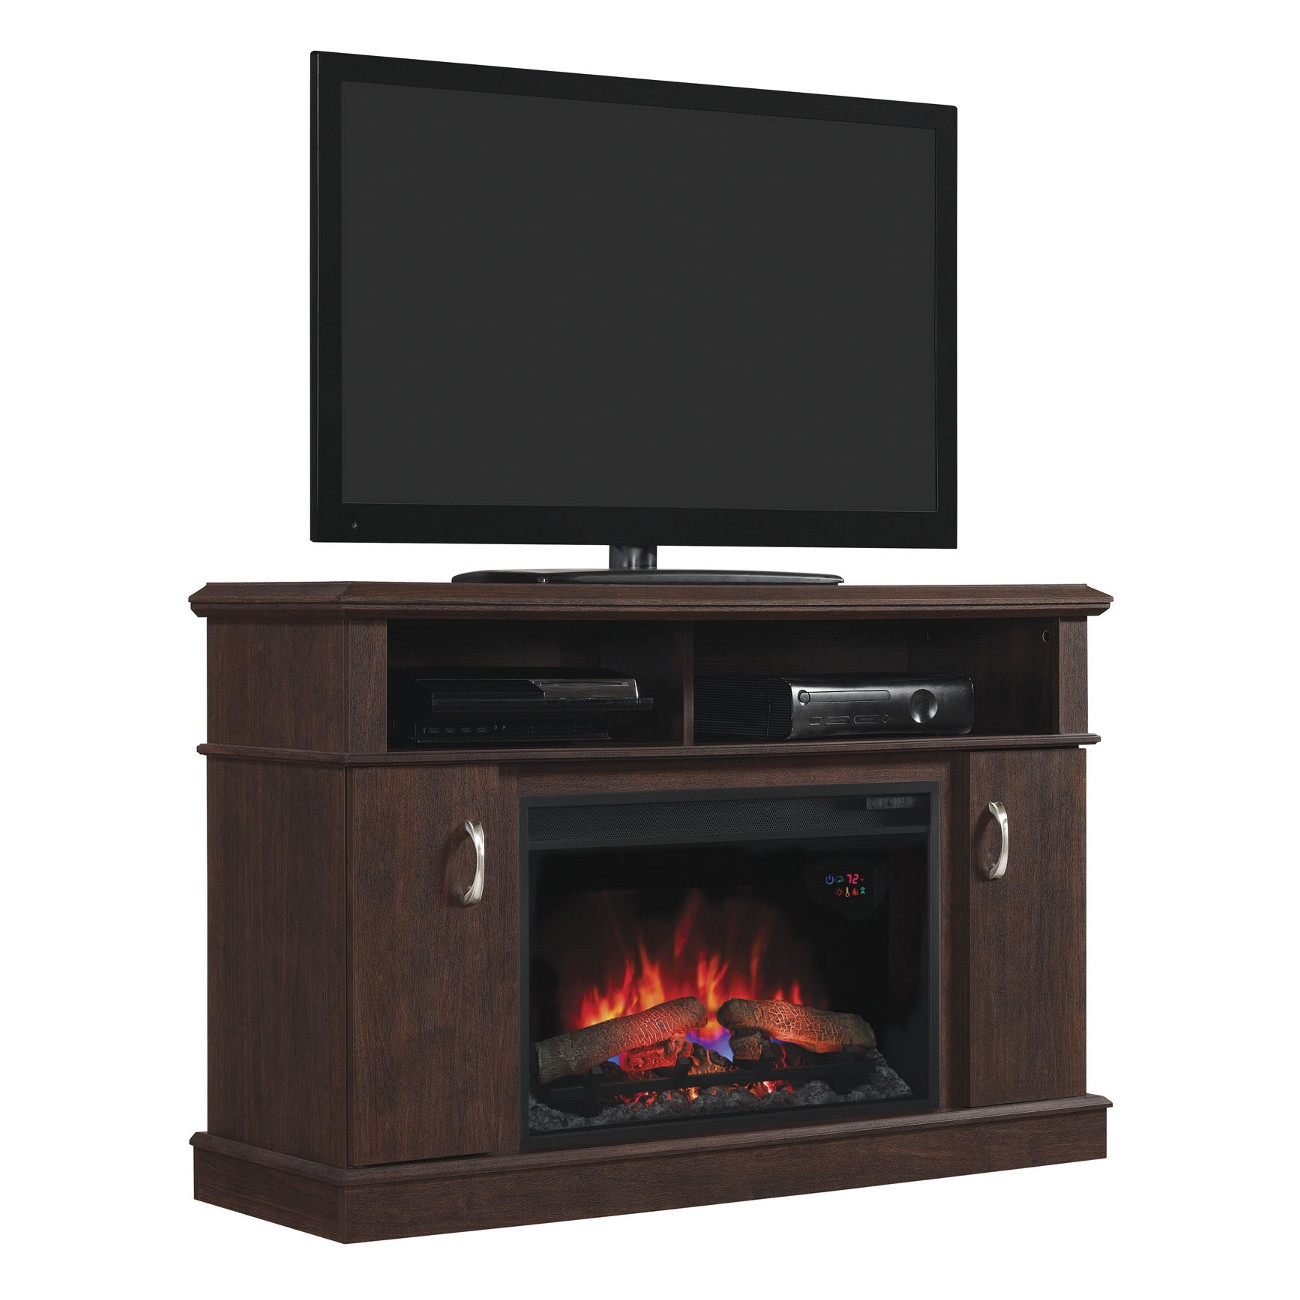 Classic Flame Electric Fireplace
 Classic Flame Dwell 26MM5516 PC72 Electric Fireplace Media